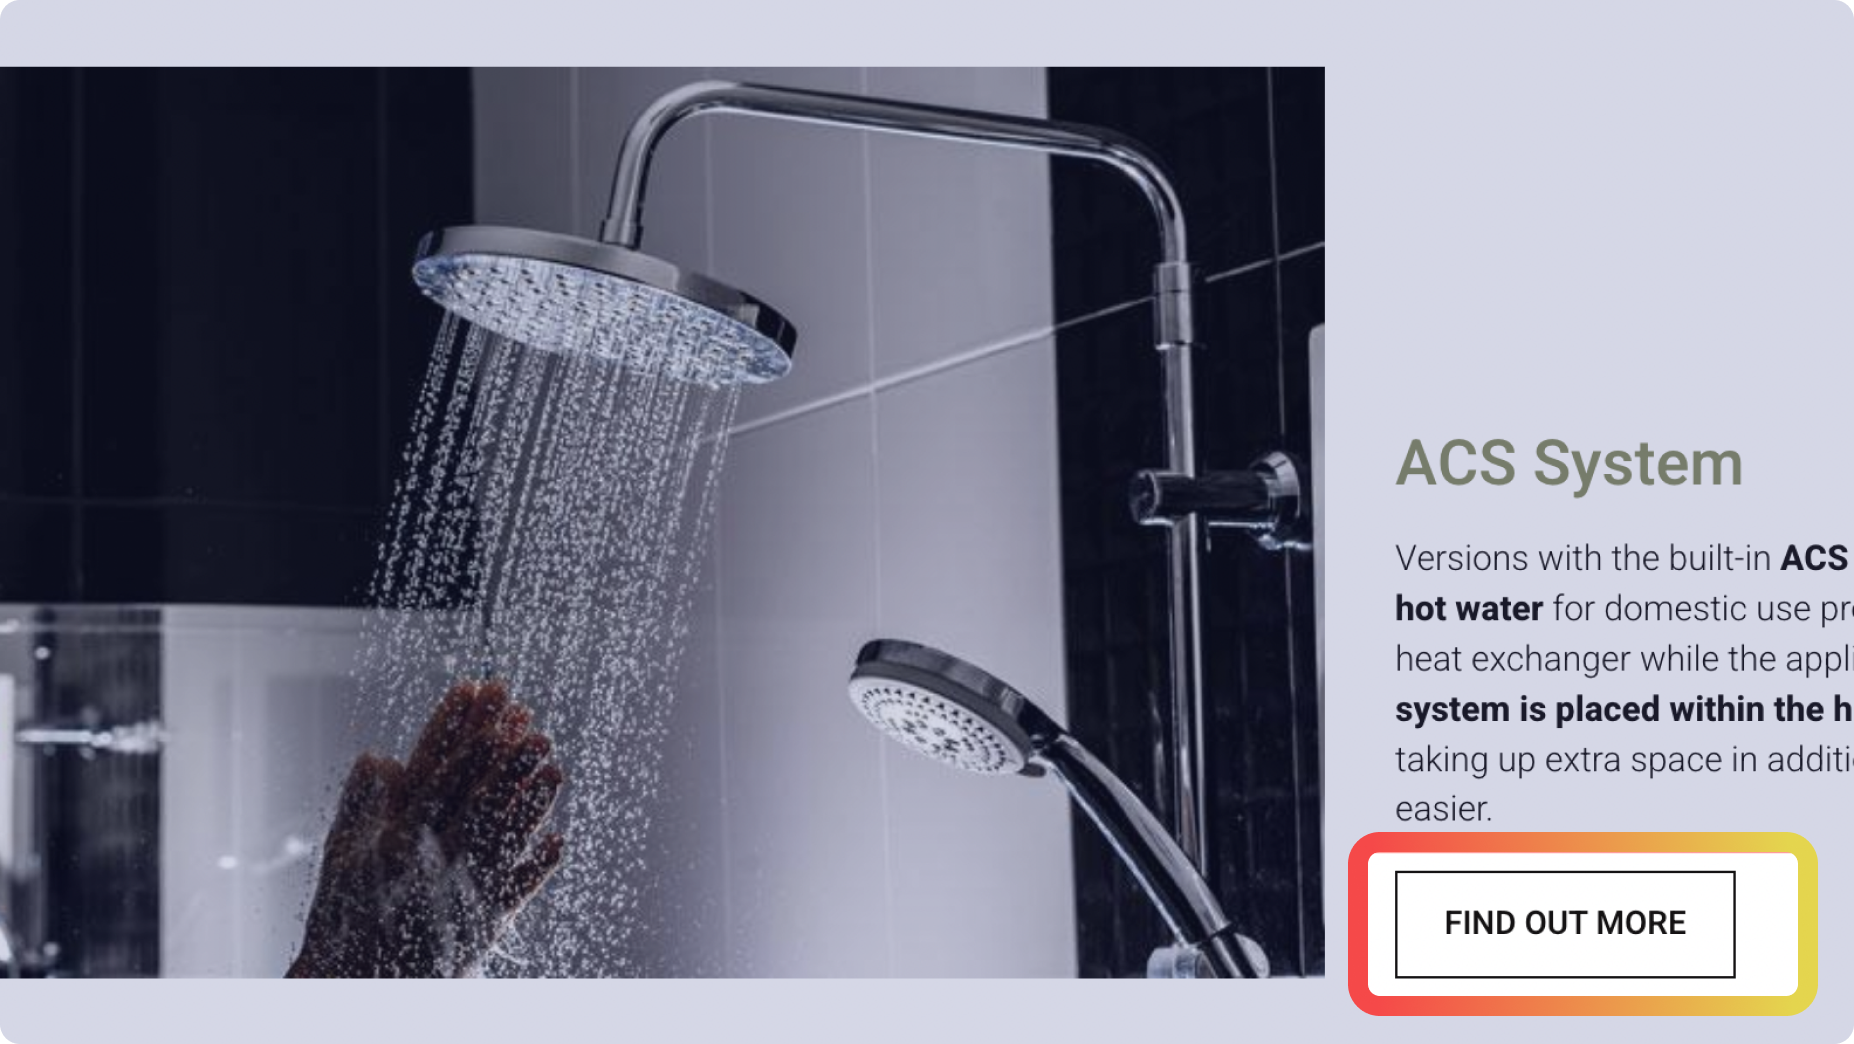 Screenshot of shower, its description, and «Find out more» button if you want to know more